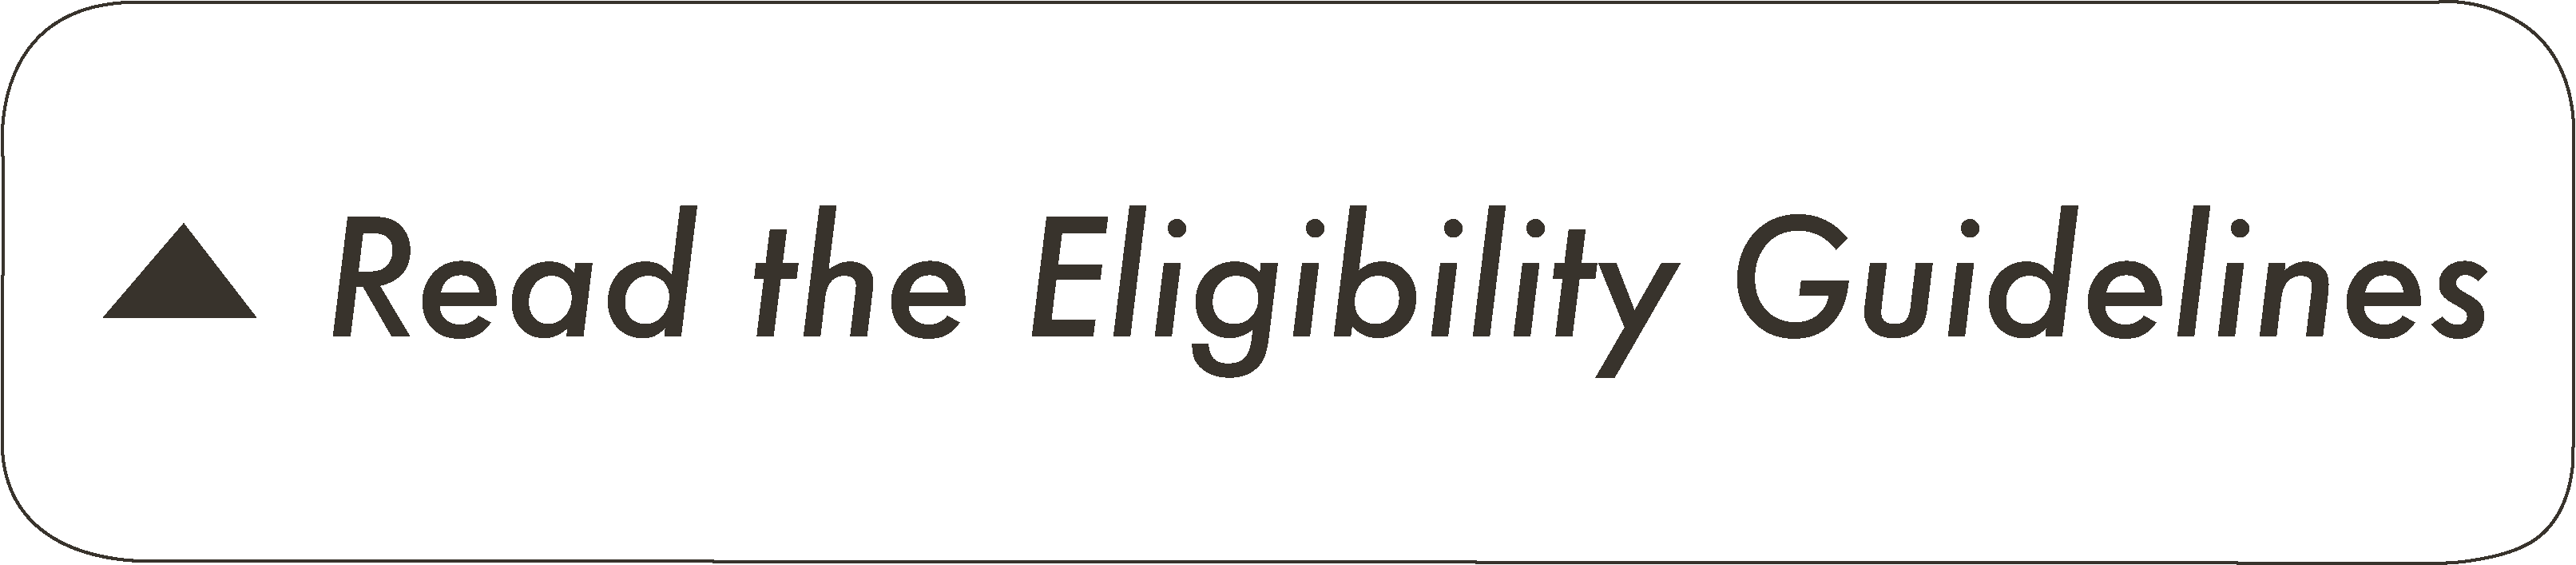 Read the Eligibility Guidelines